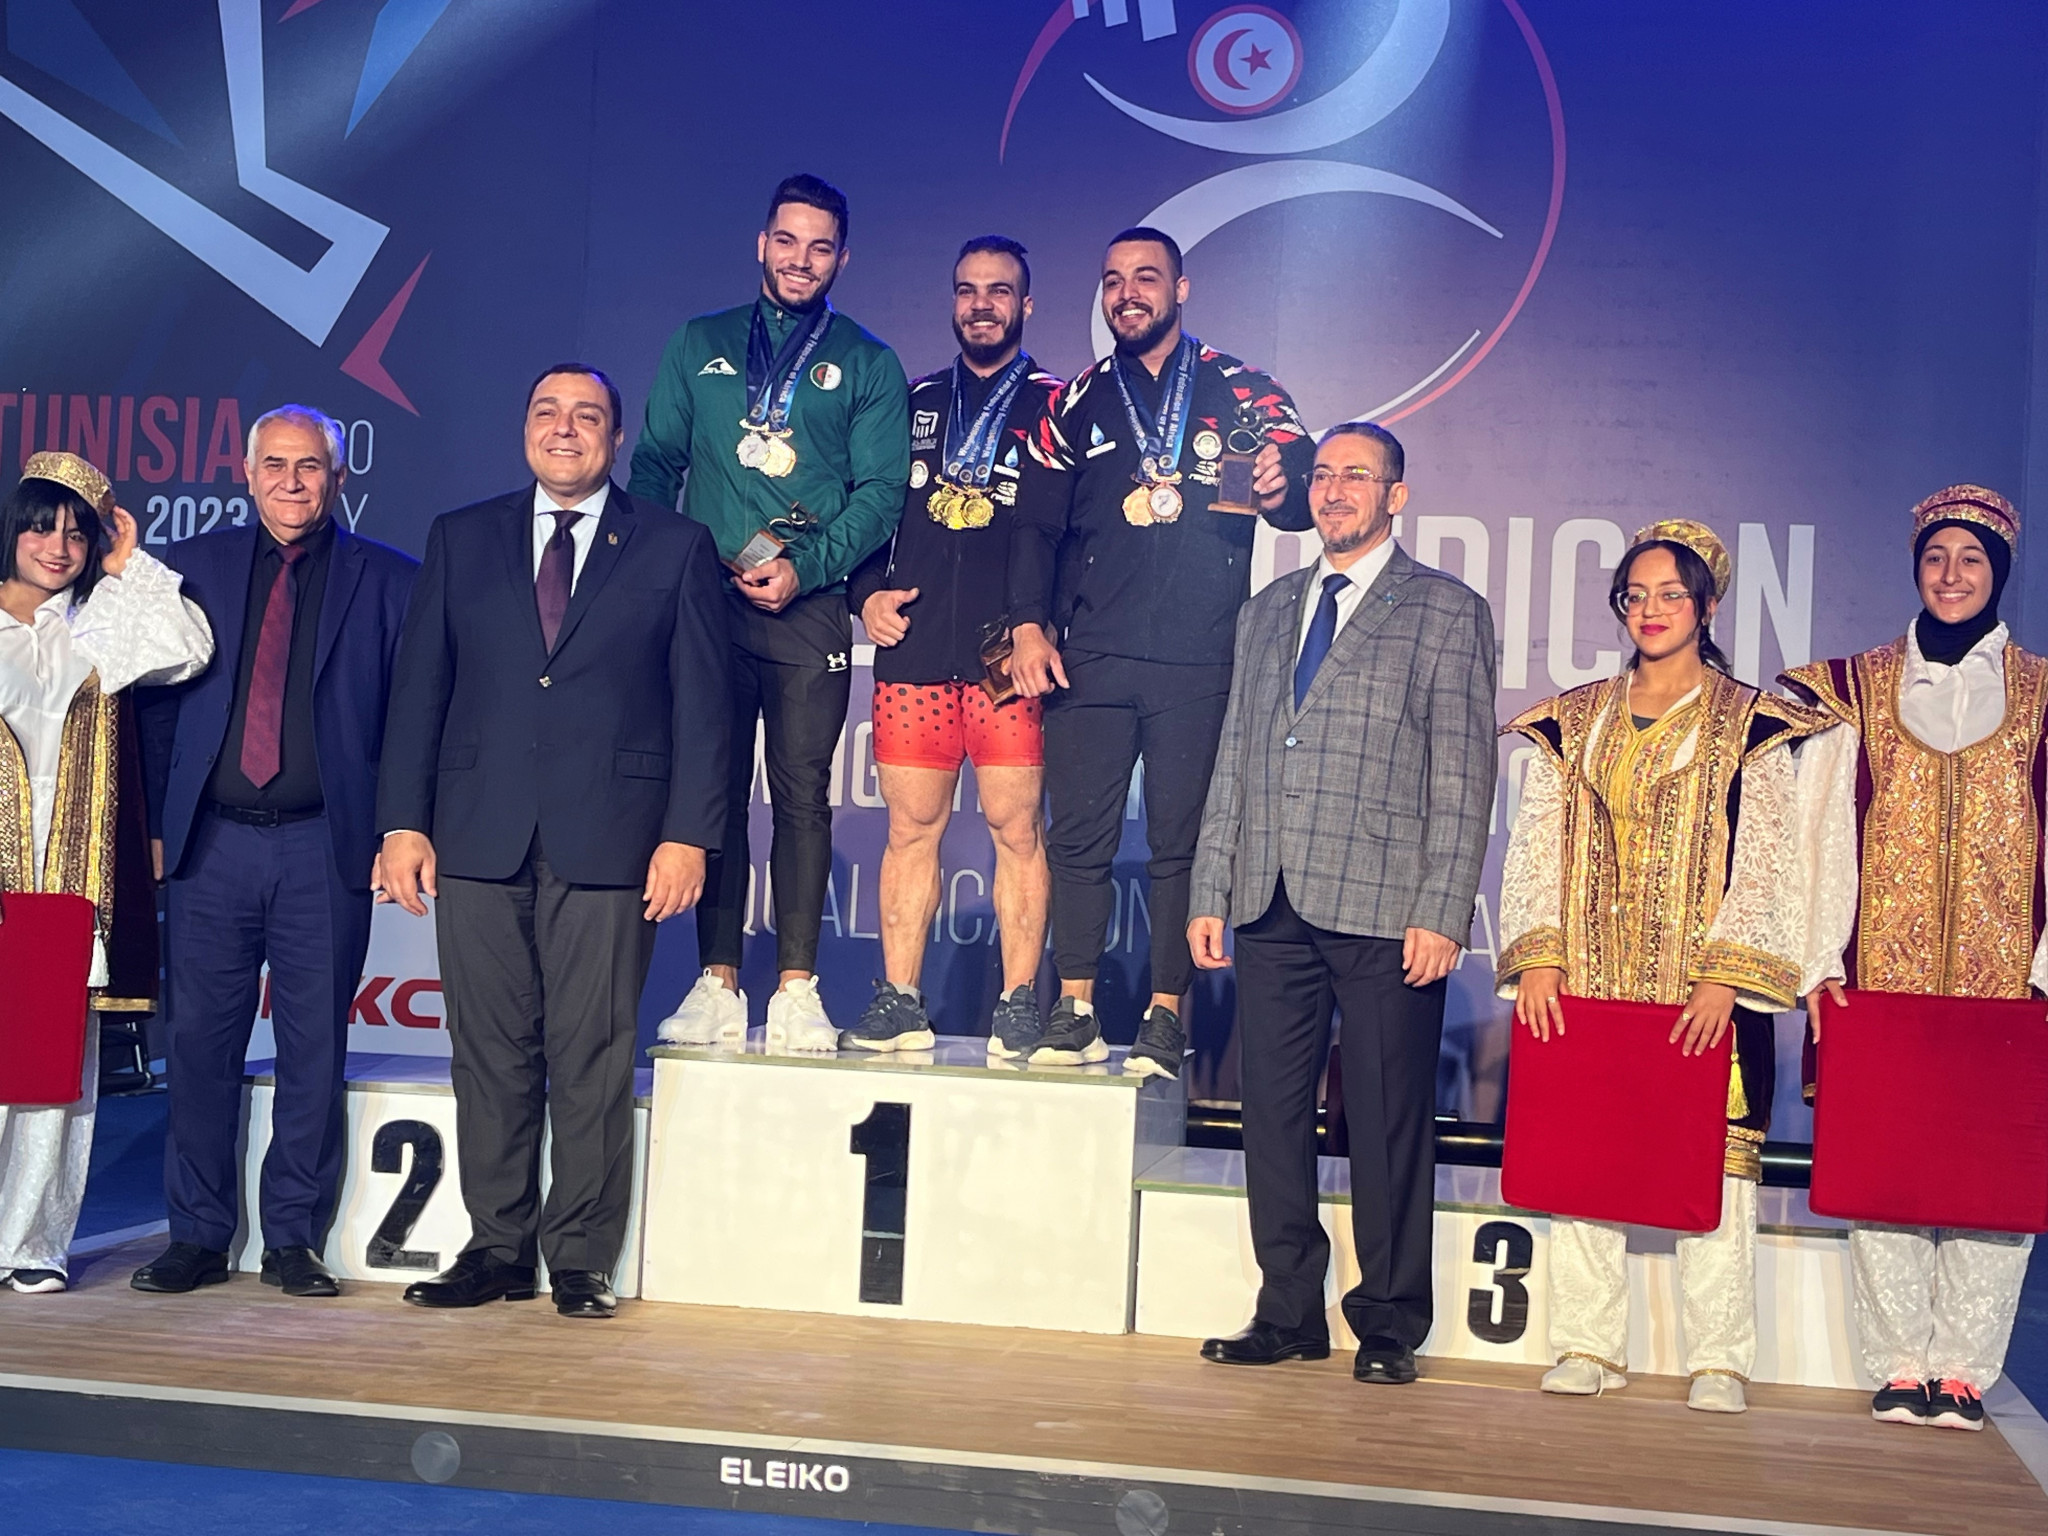 The podium ceremony for the men’s 89kg category ©Brian Oliver